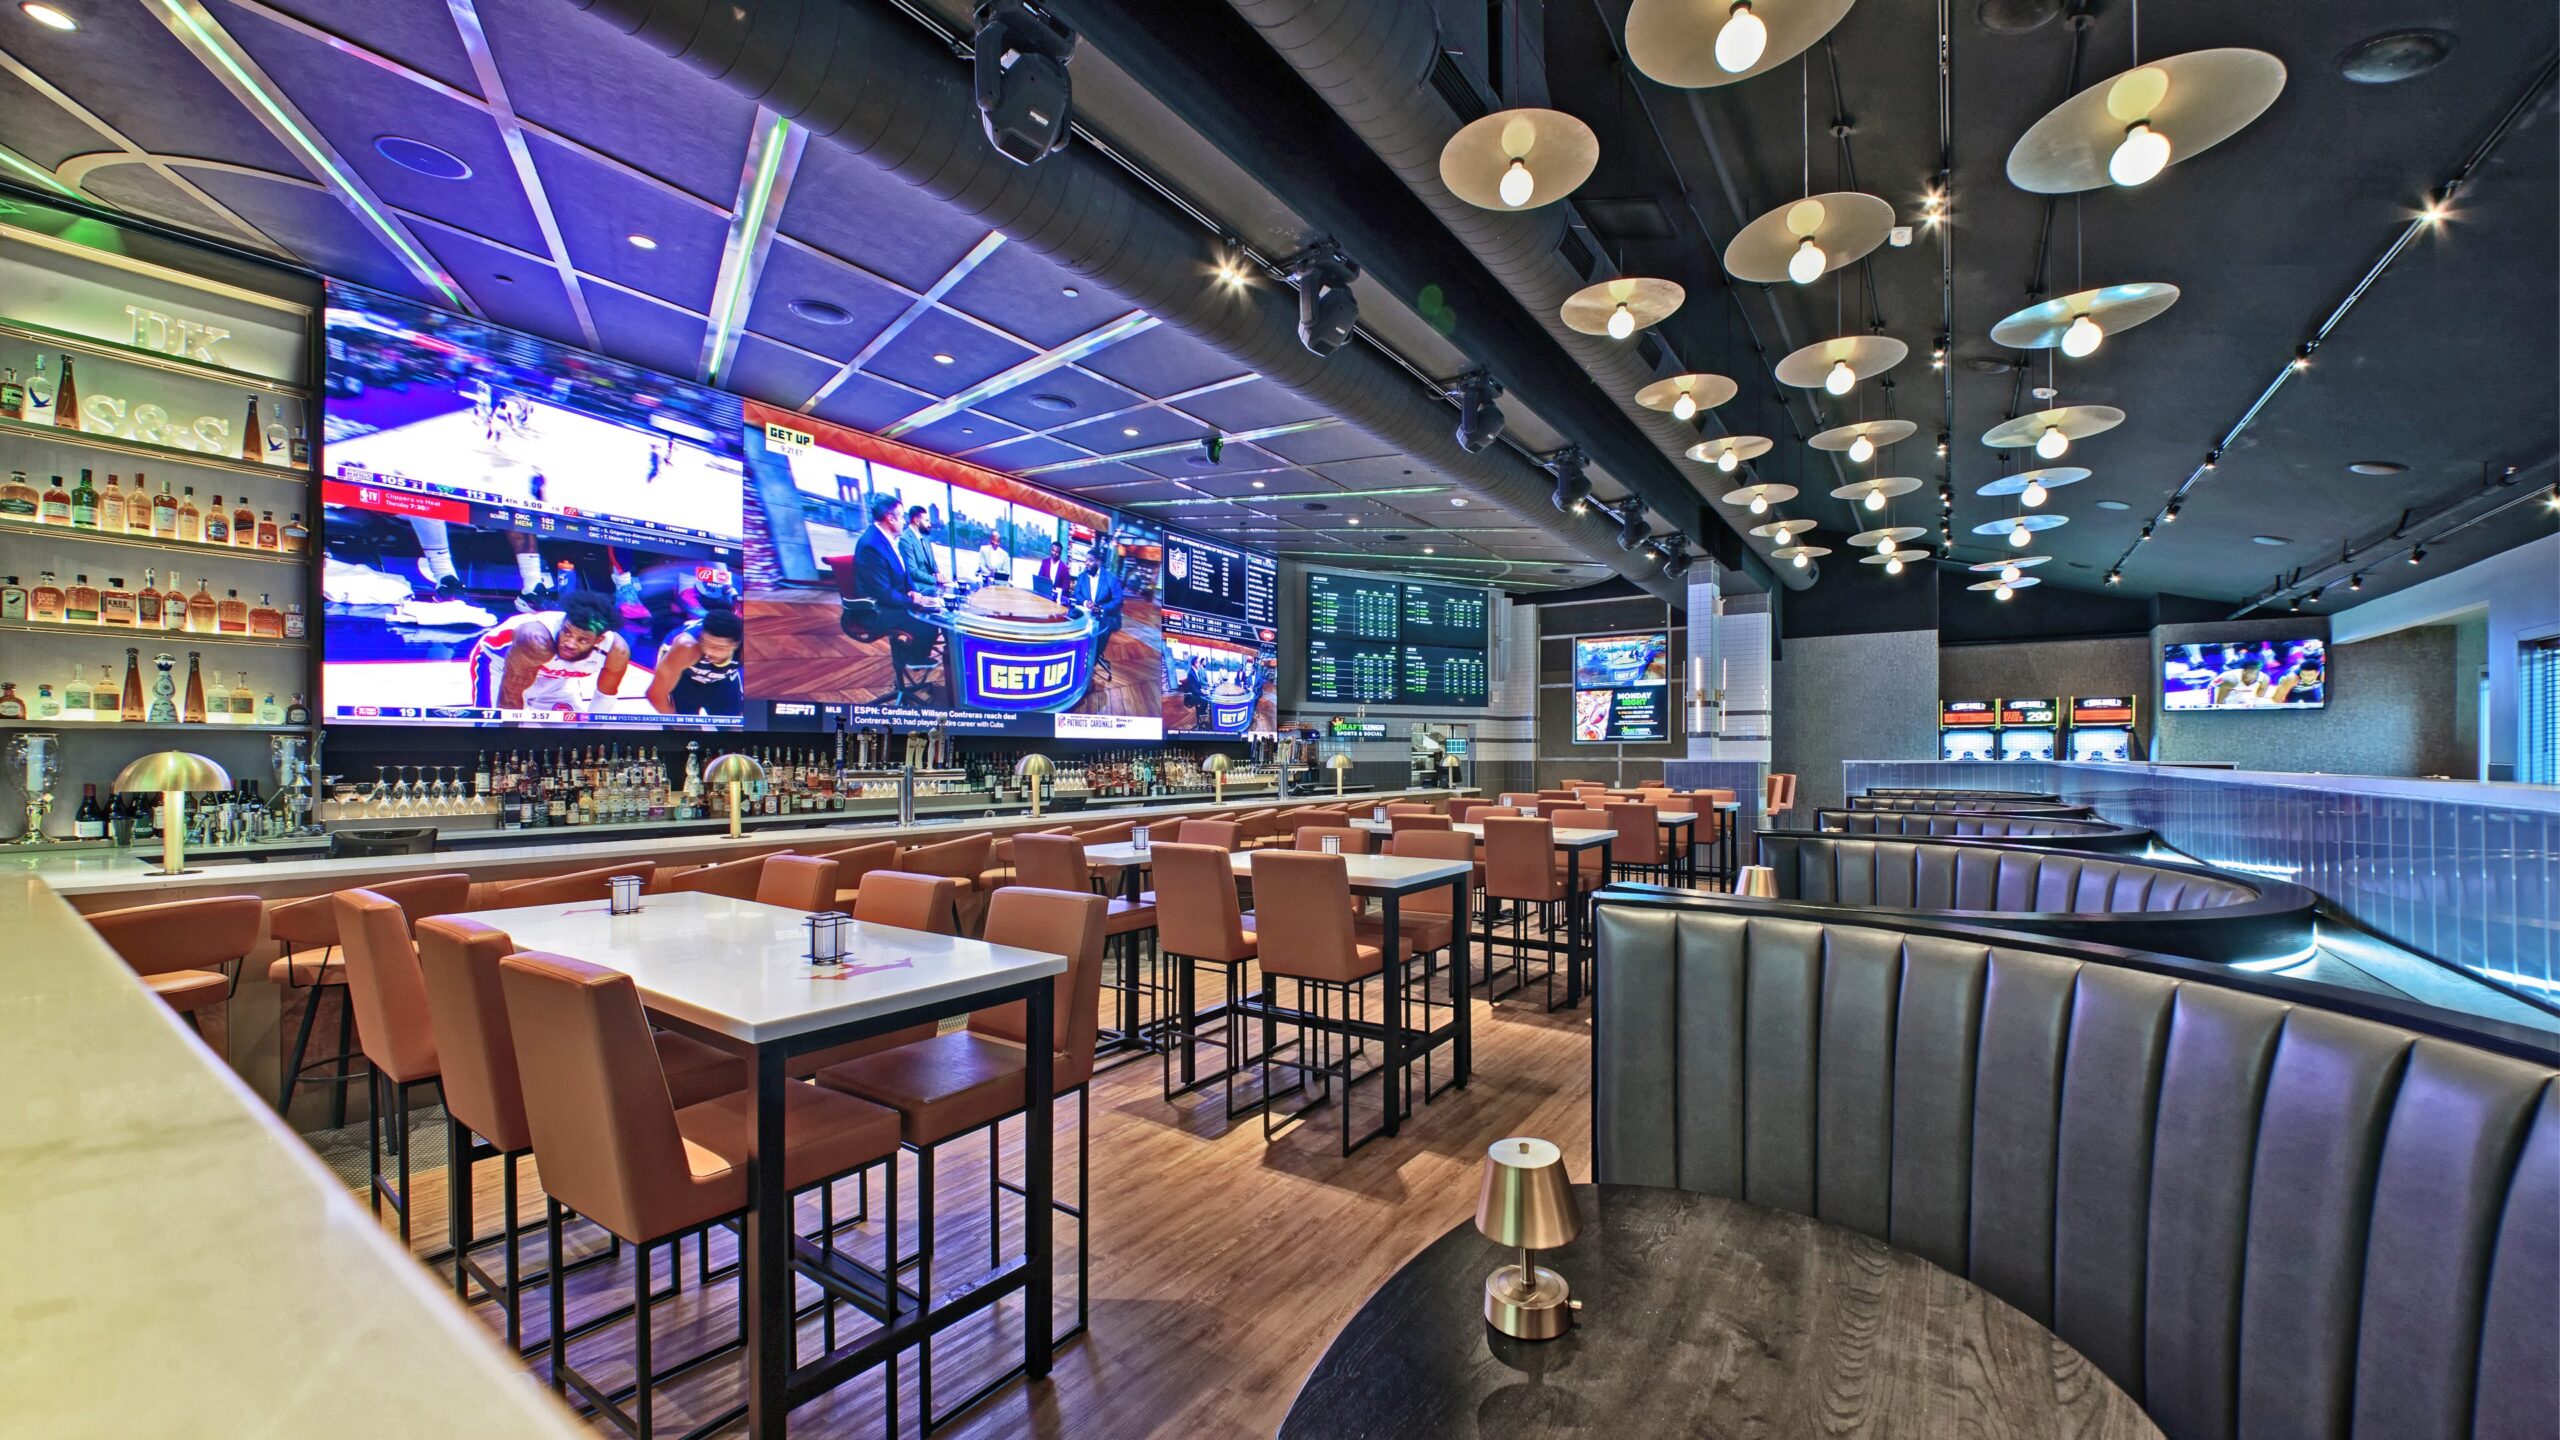 Draftkings Sports & Social Nashville Live! main bar rendering with media wall and tables.